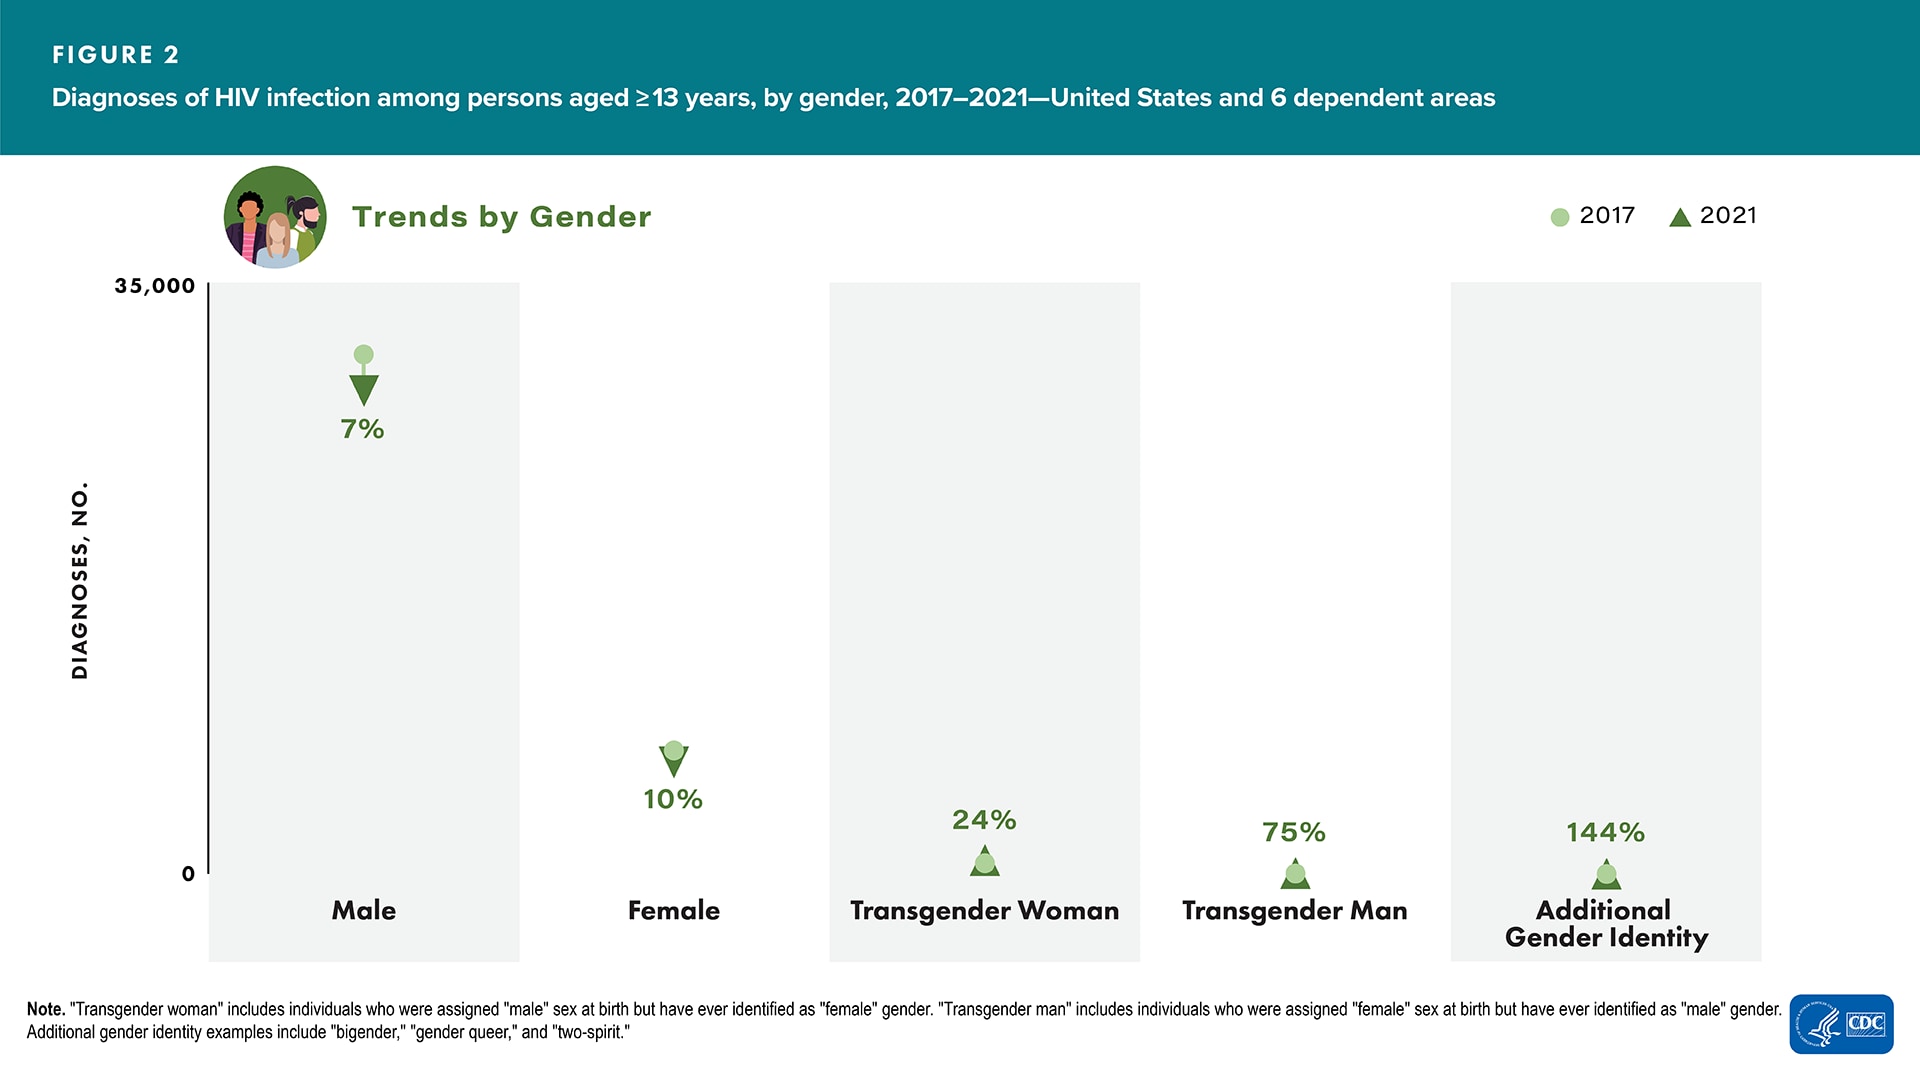 In 2021, compared to 2017, in the United States and 6 dependent areas, the number of diagnoses of HIV infection increased among transgender women, transgender men, and additional gender identity persons aged ≥13 years  and decreased among male and female persons aged ≥13 years.